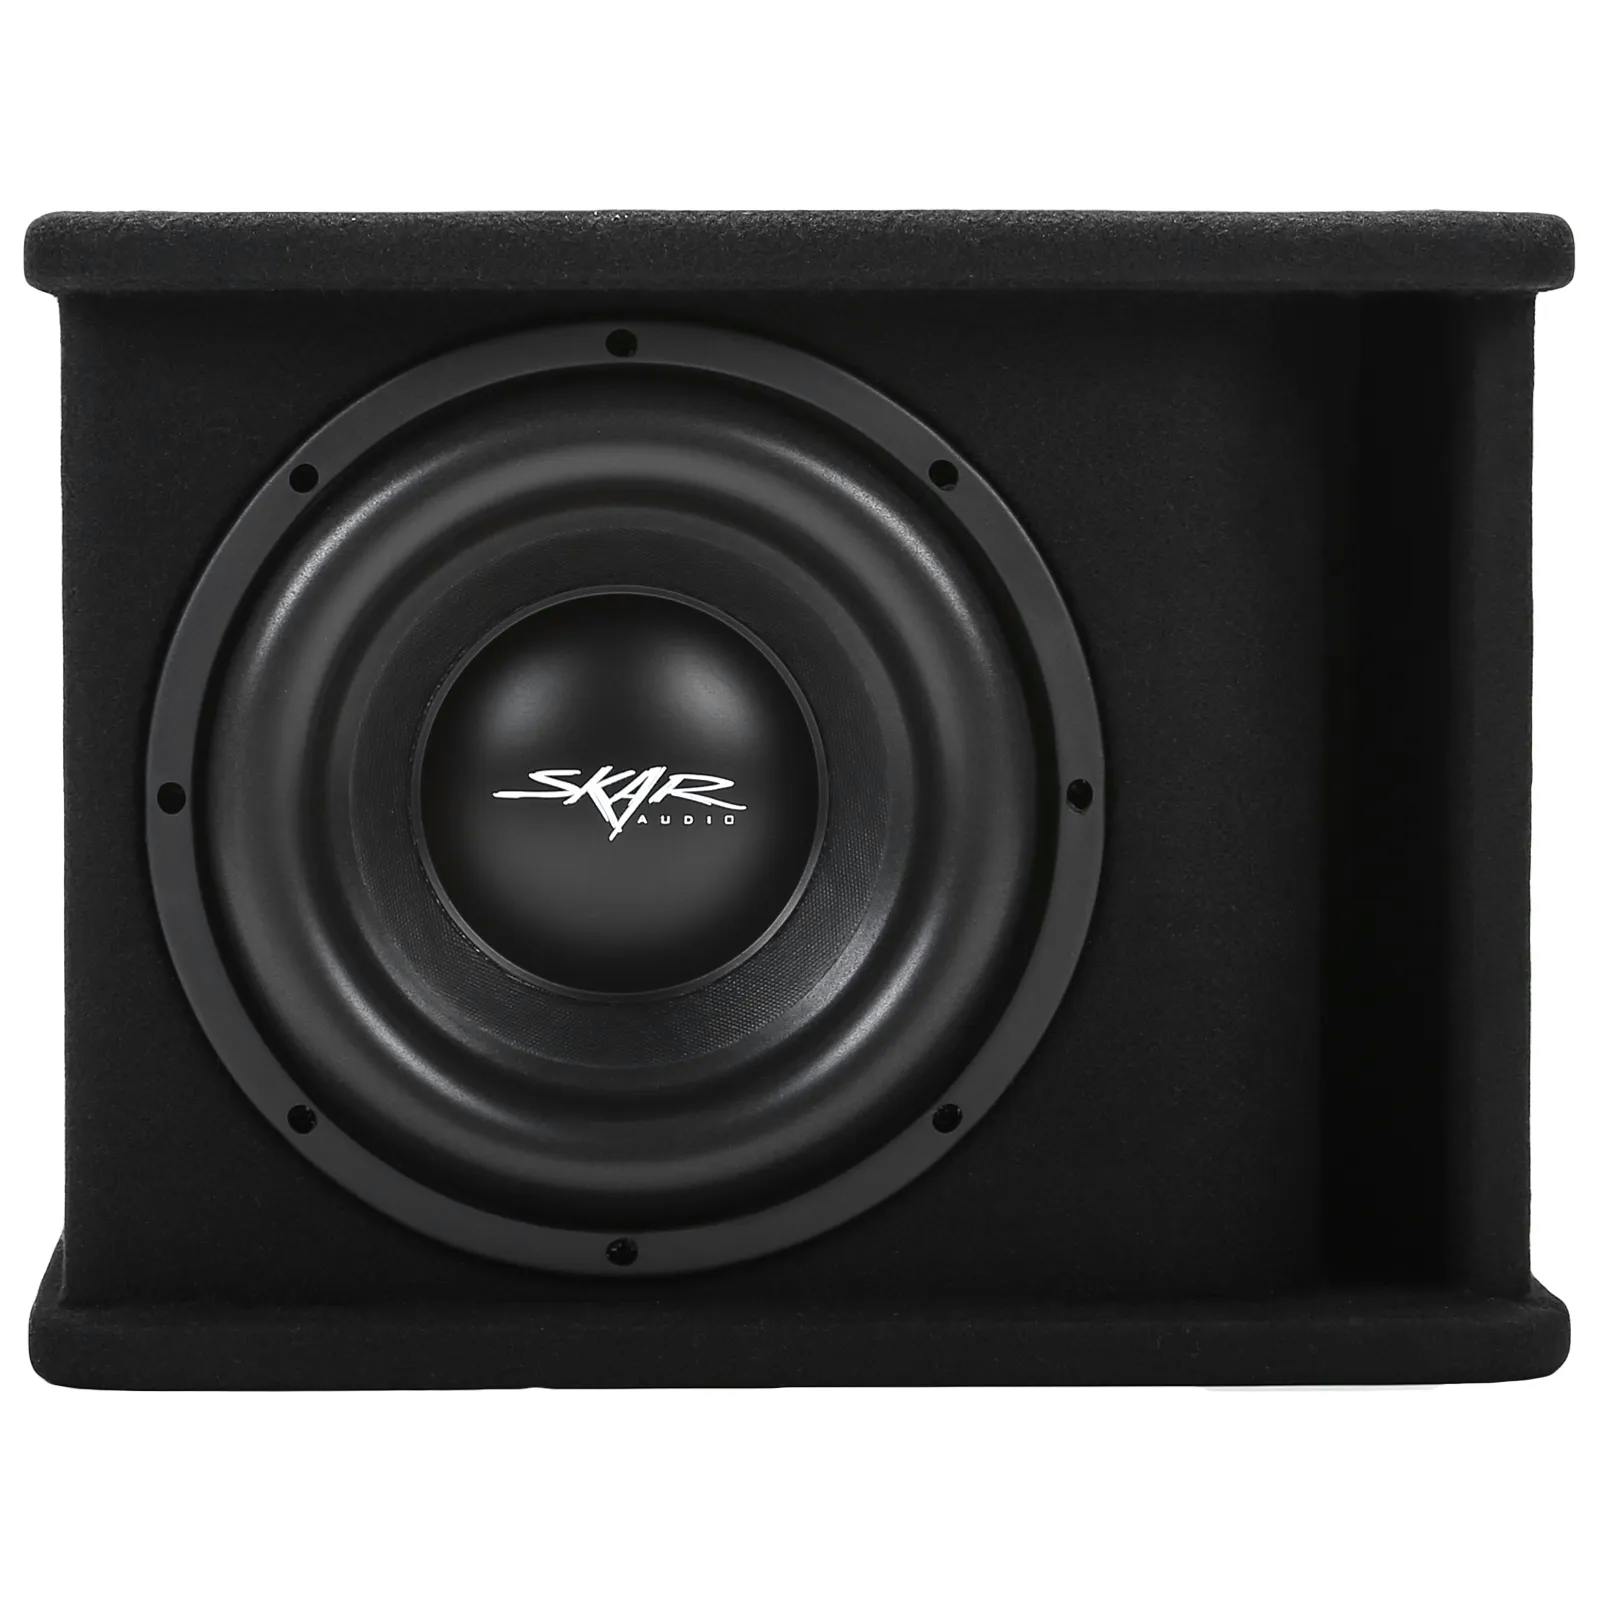 Featured Product Photo 1 for SDR-1X10D2 | Single 10" 1,200 Watt SDR Series Loaded Vented Subwoofer Enclosure